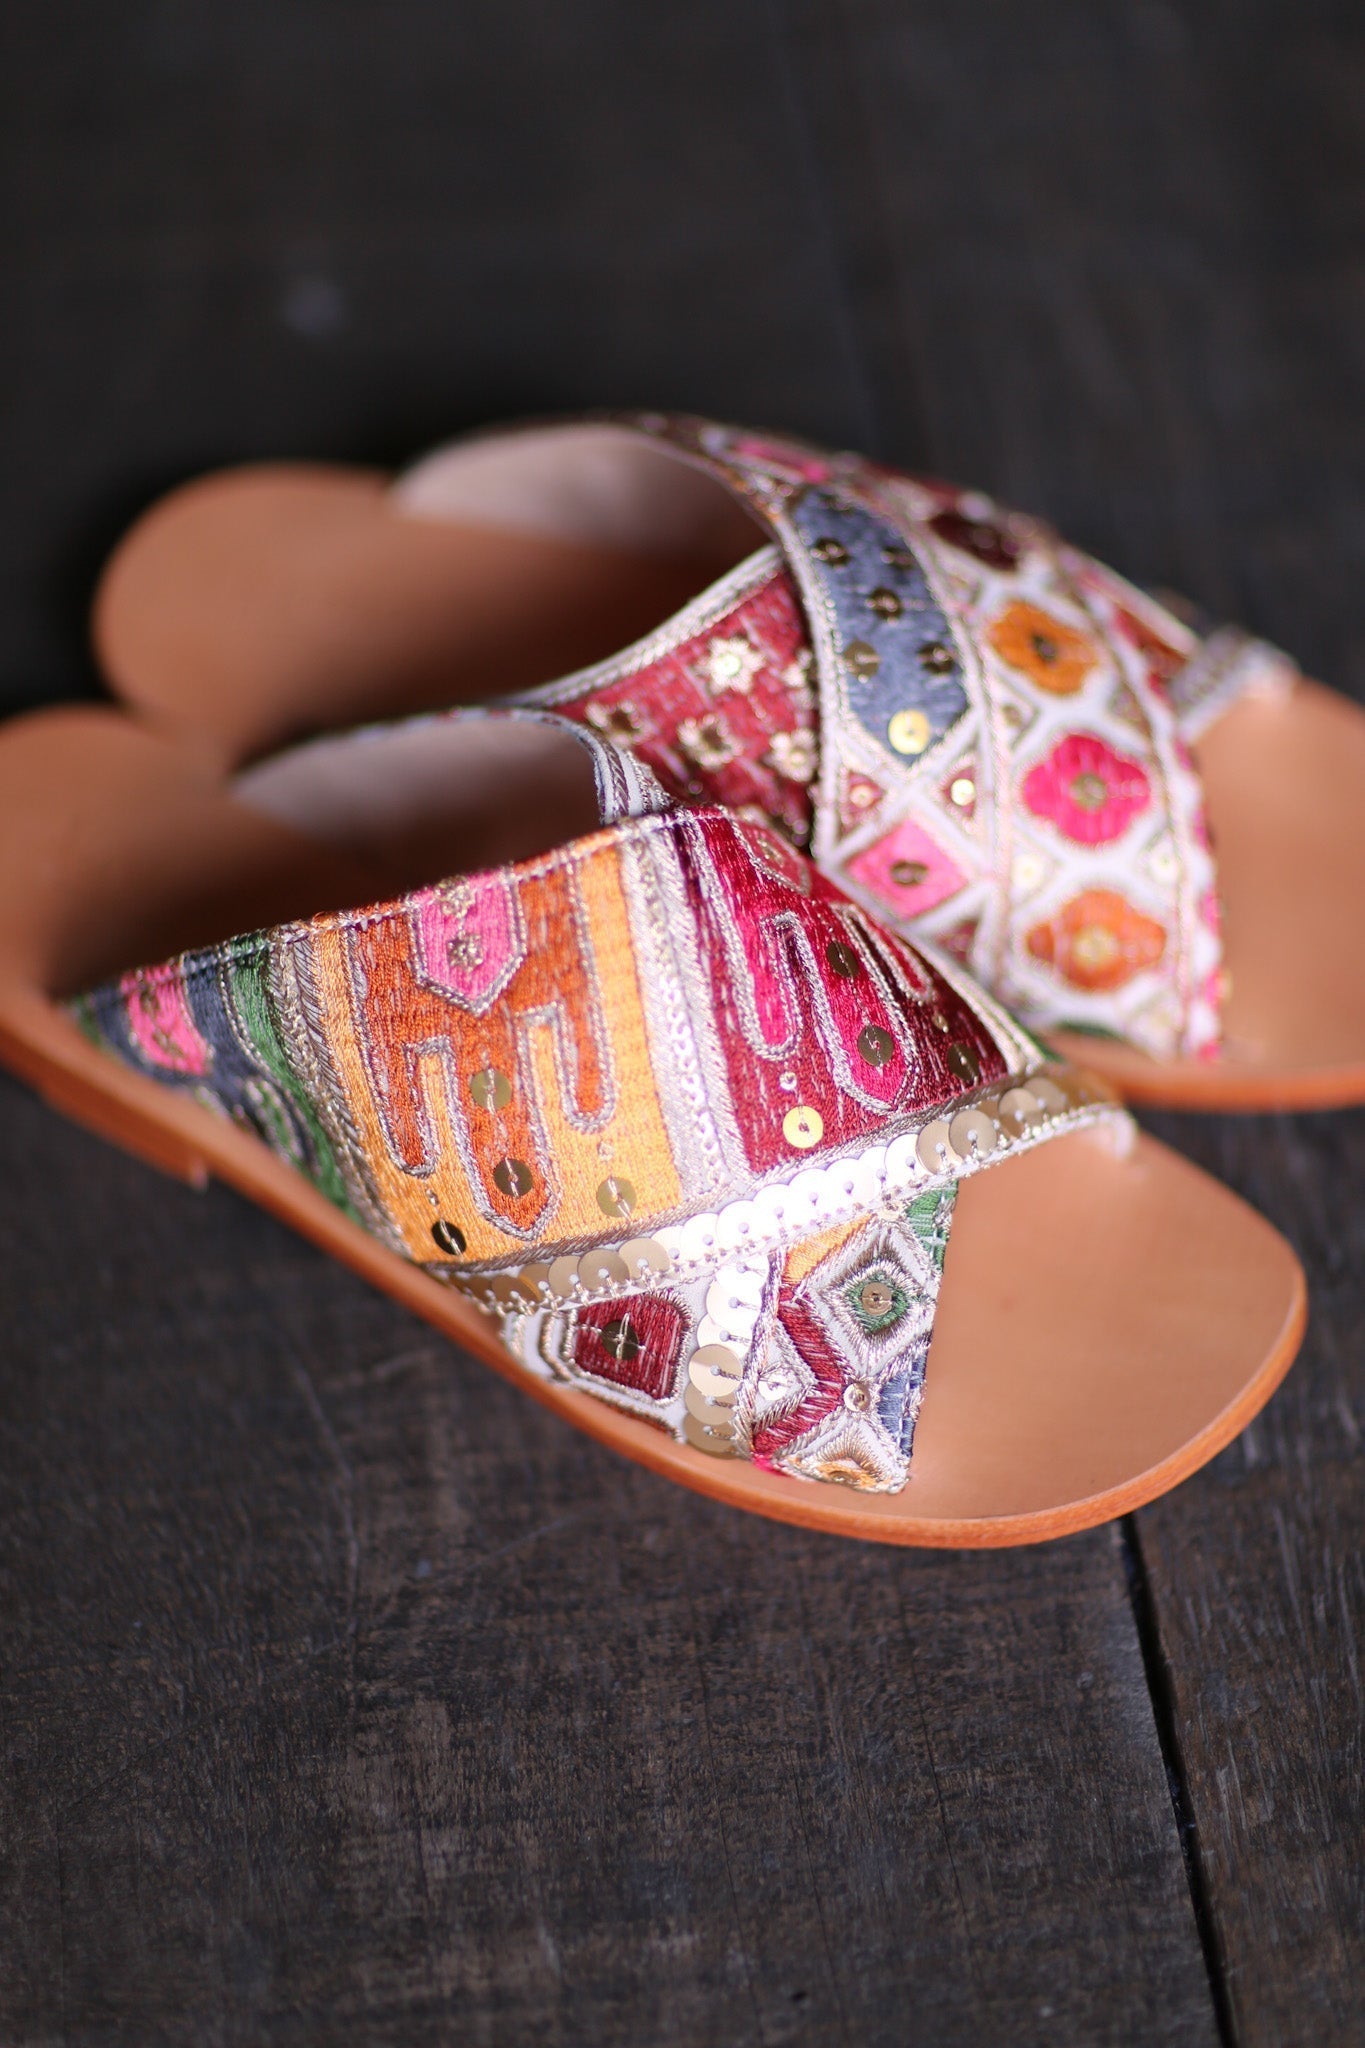 EMBROIDERED LEATHER SLIP ON SANDALS TRIBECA - BANGKOK TAILOR CLOTHING STORE - HANDMADE CLOTHING